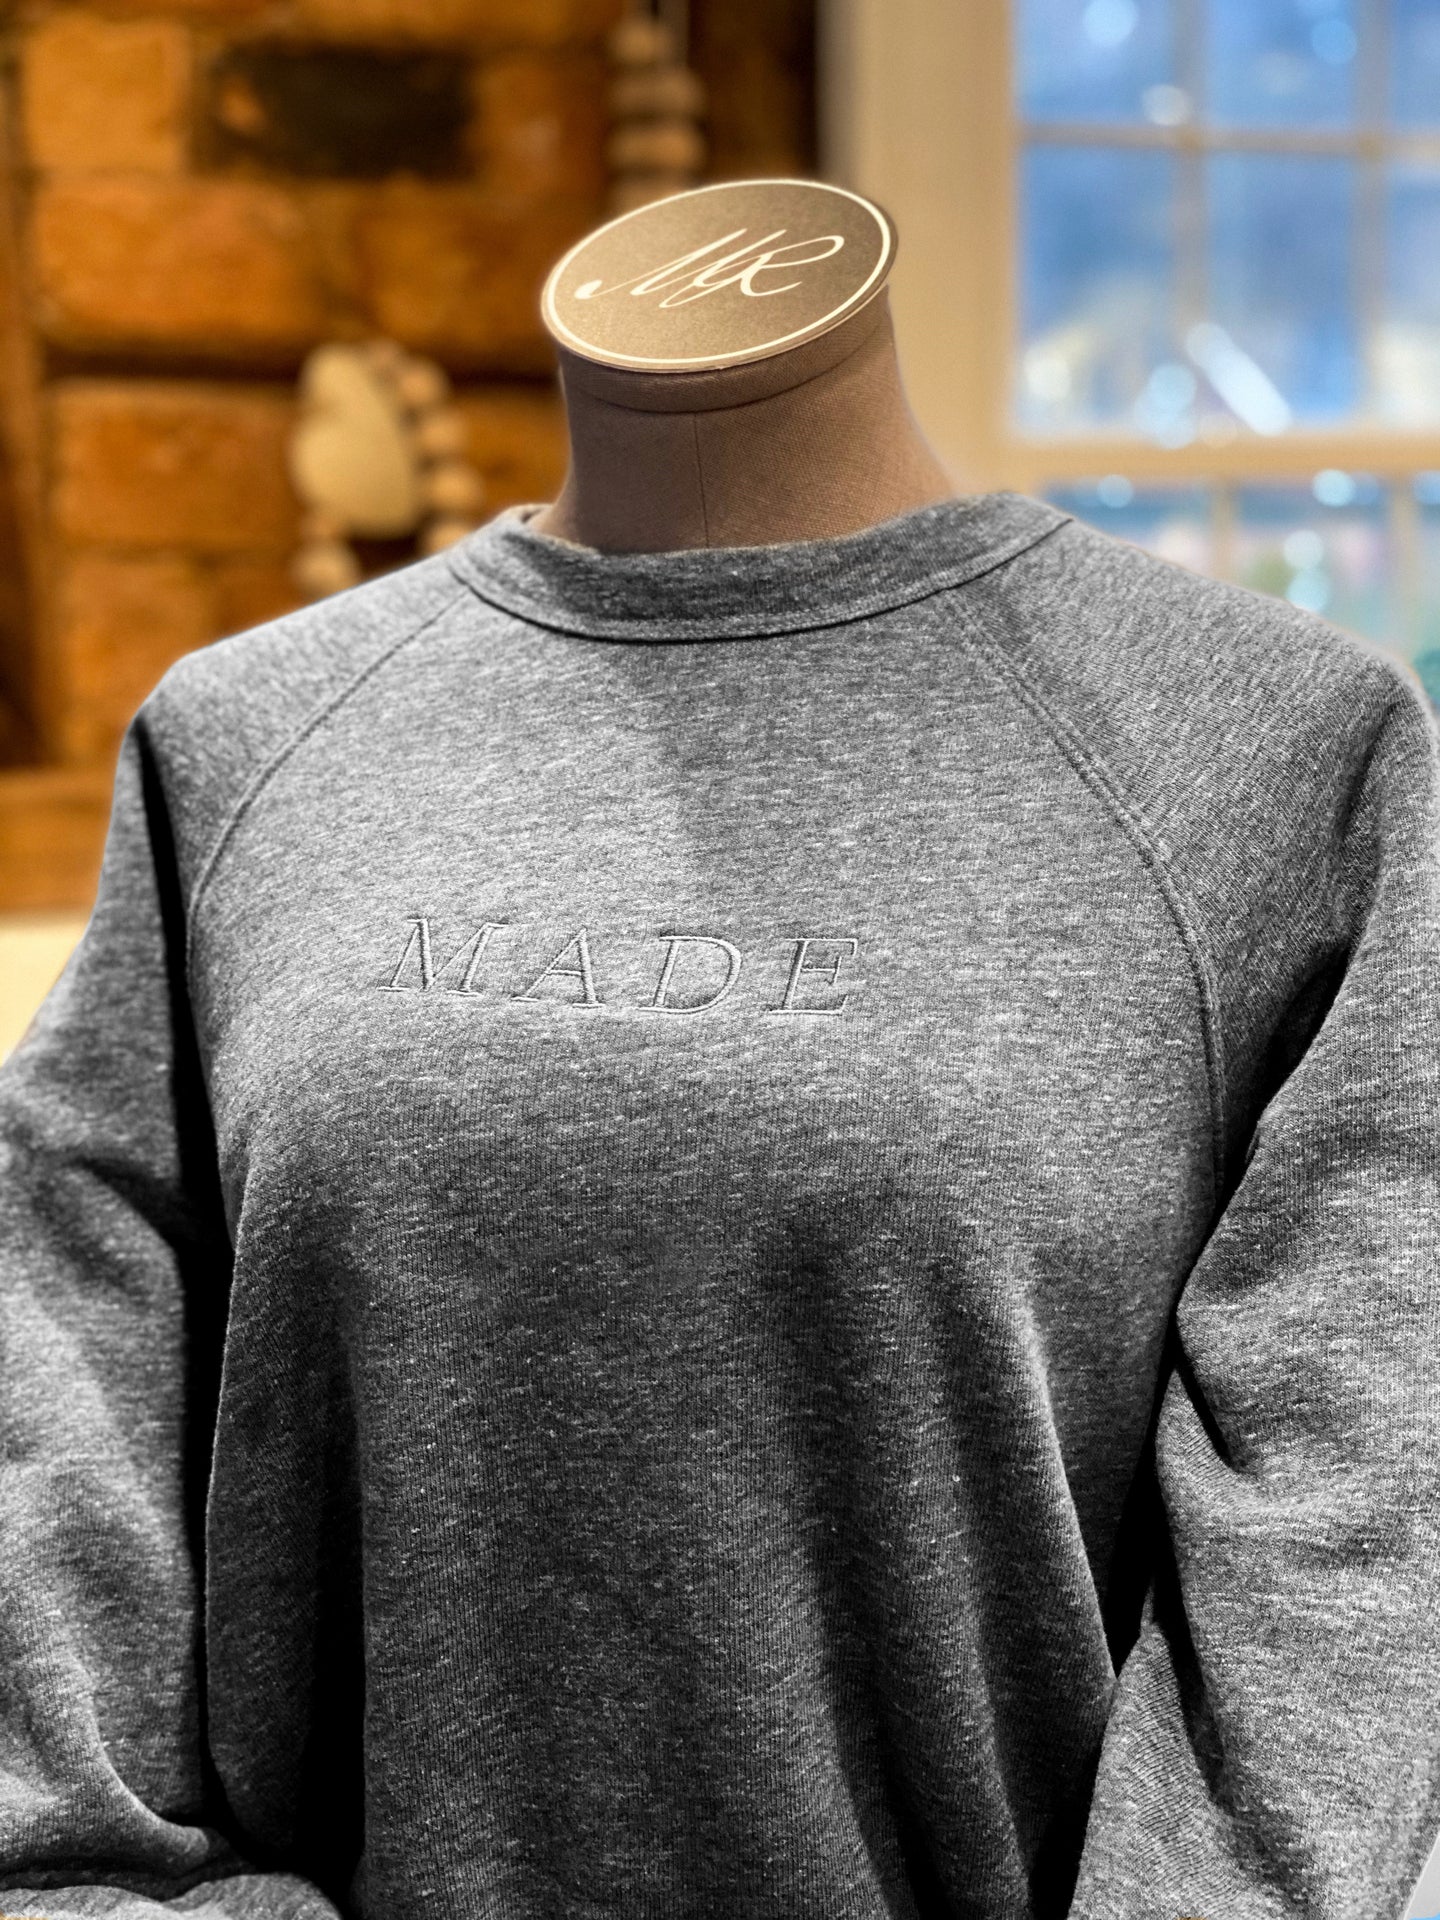 MADE by Michael Russo Sweatshirt